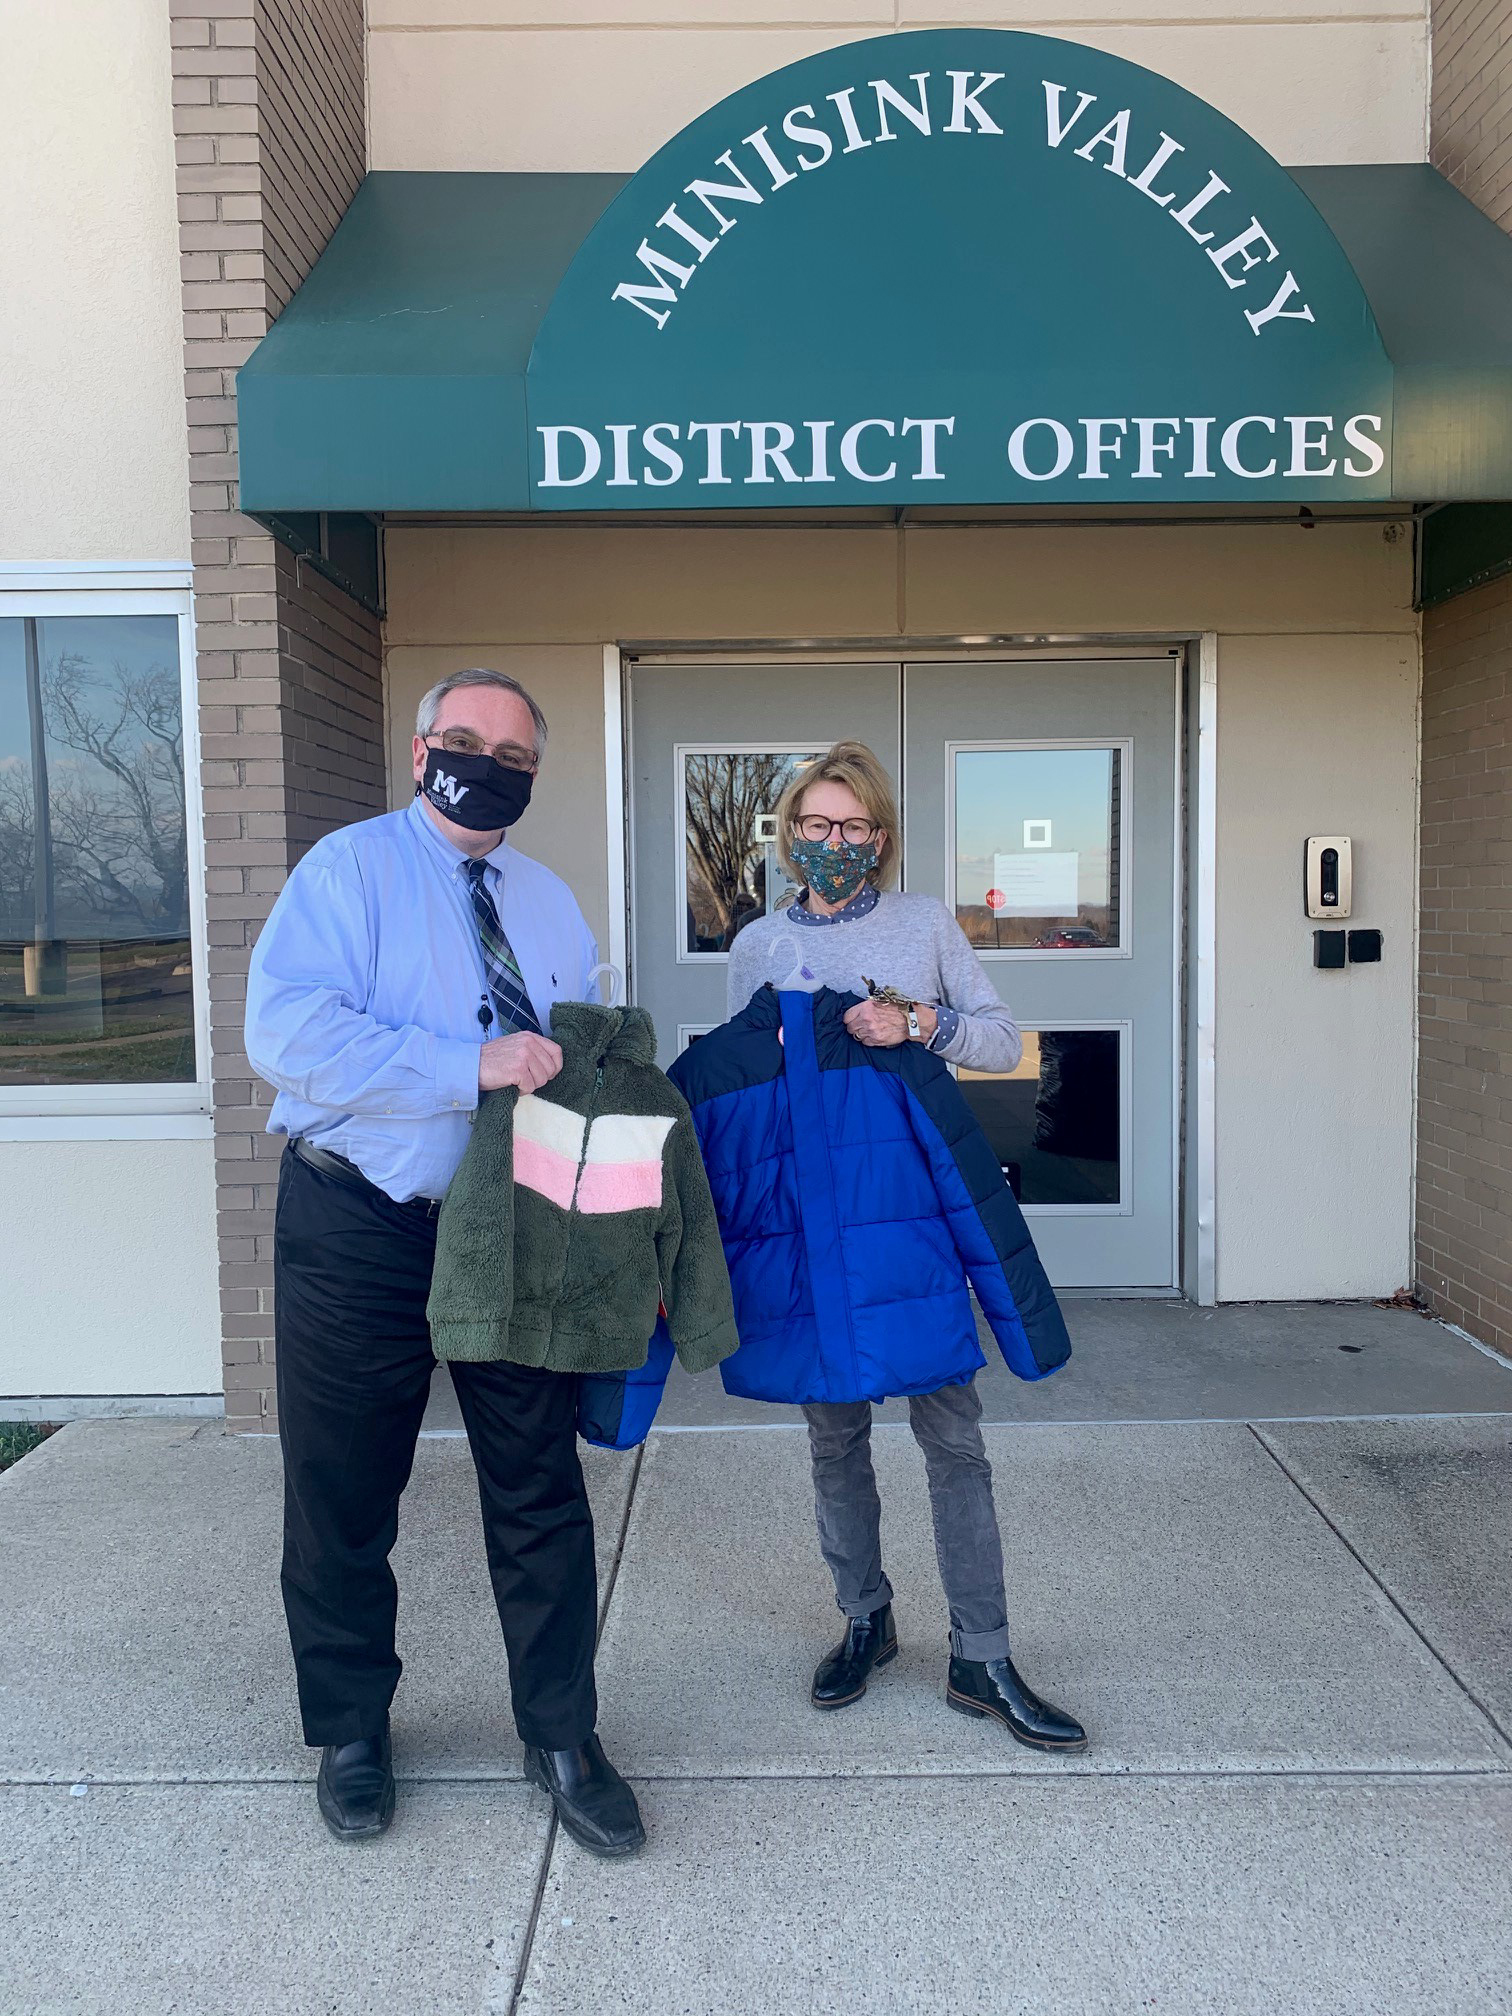 Today I had the privilege of delivering over 300 coats, boots, hats, and gloves to local school districts throughout the 100th District. This is an initiative that I have been doing for years. The pa